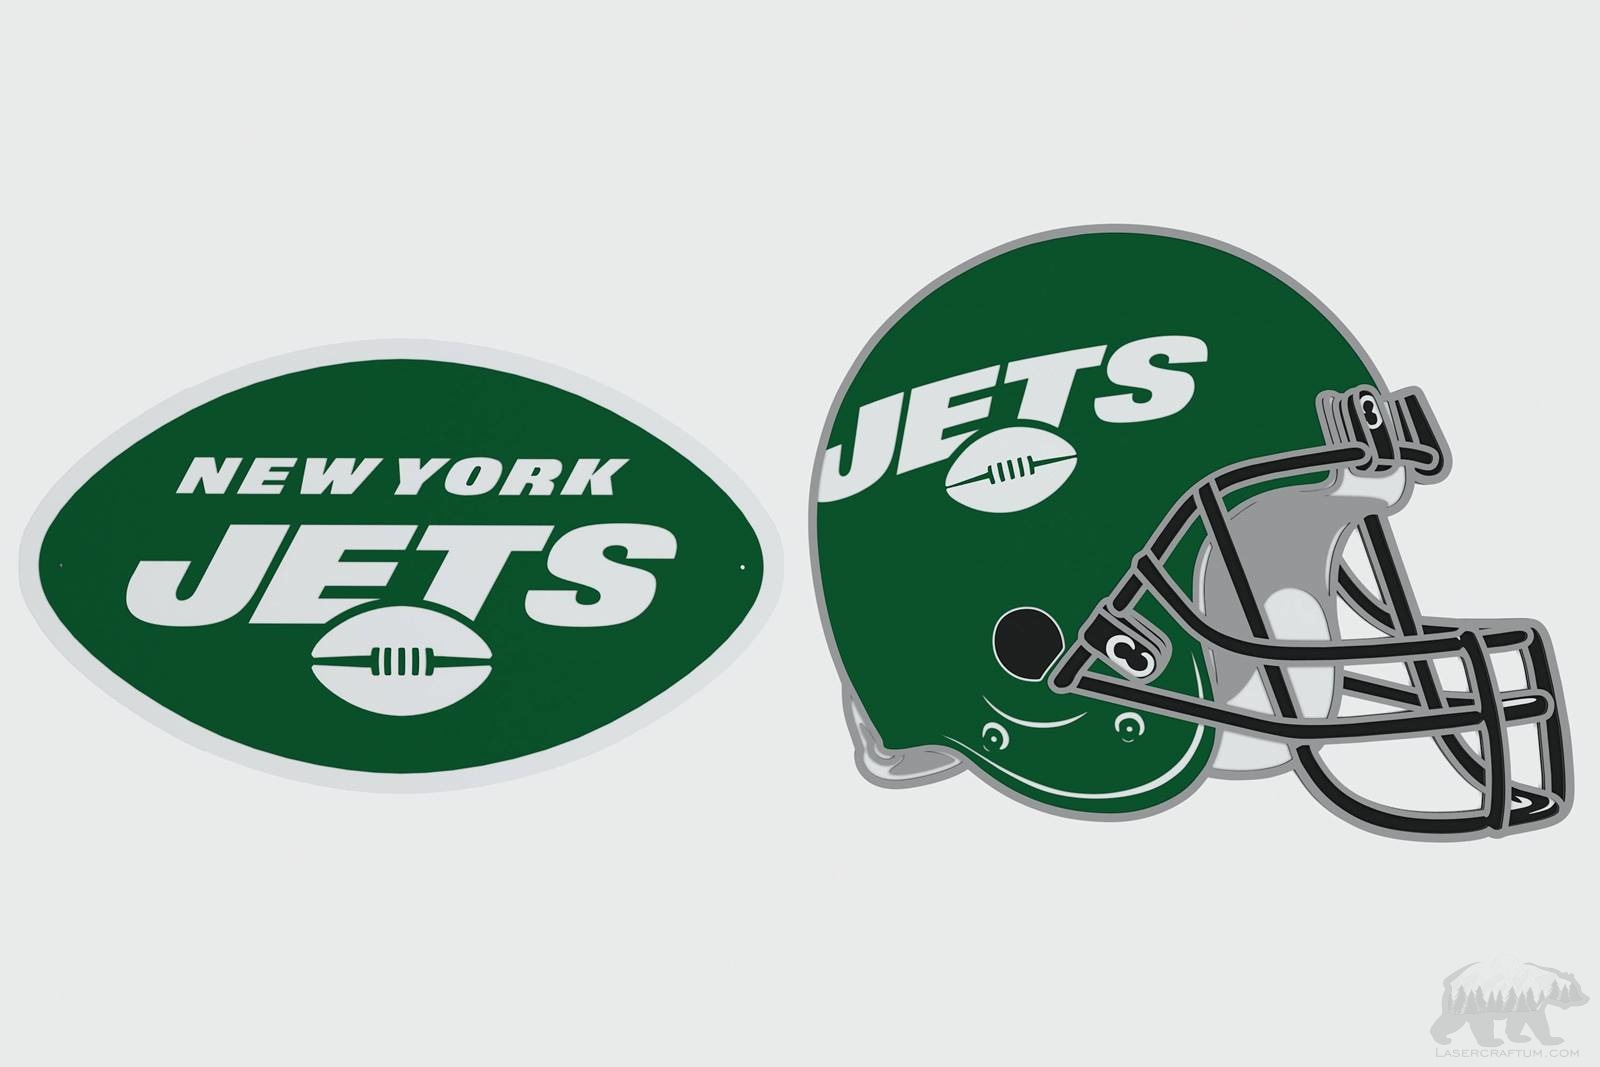 New York Jets Layered Design for cutting